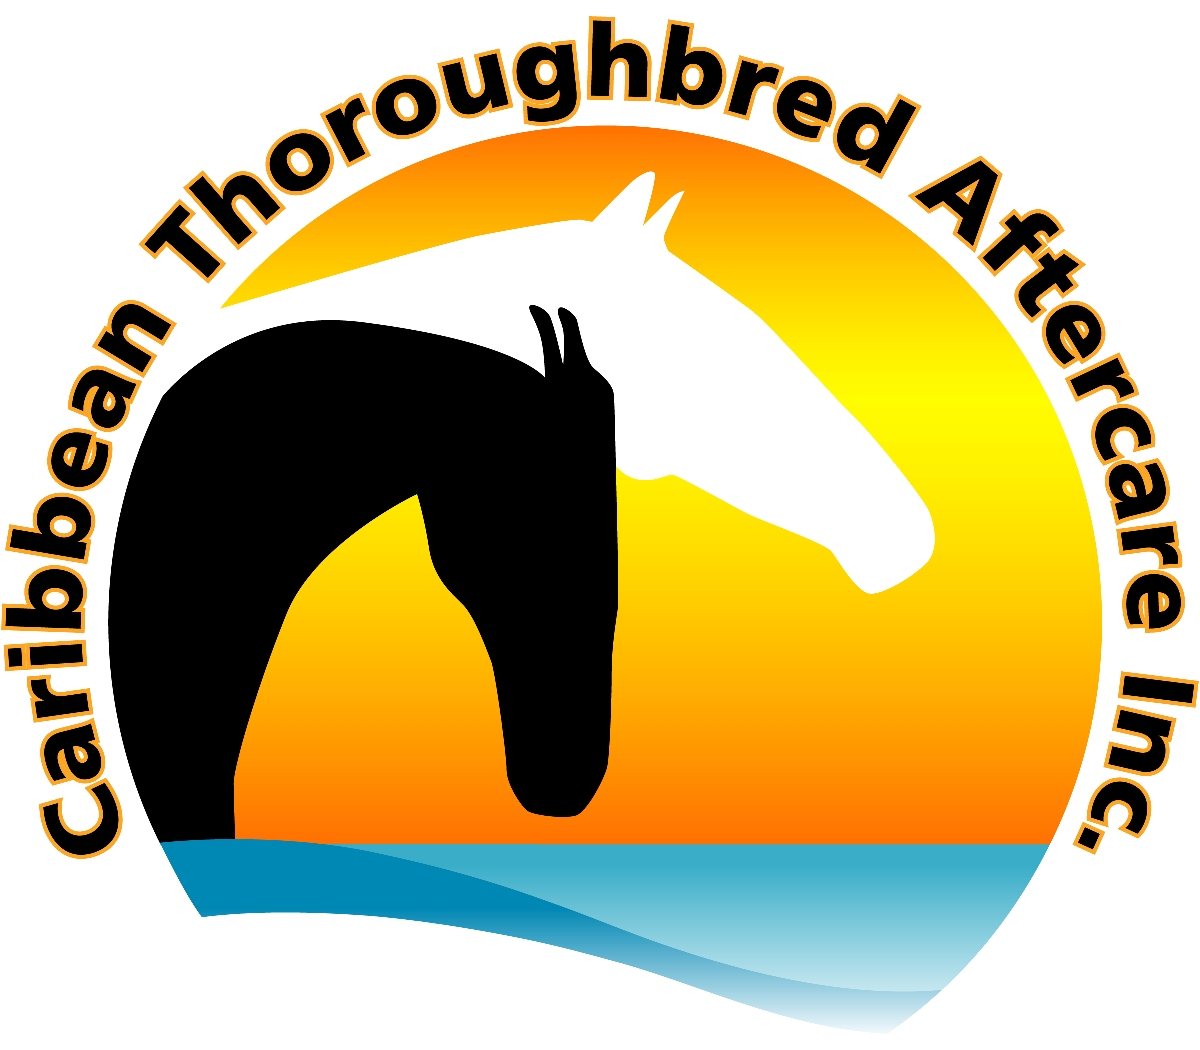 Caribbean Thoroughbred Aftercare Inc.